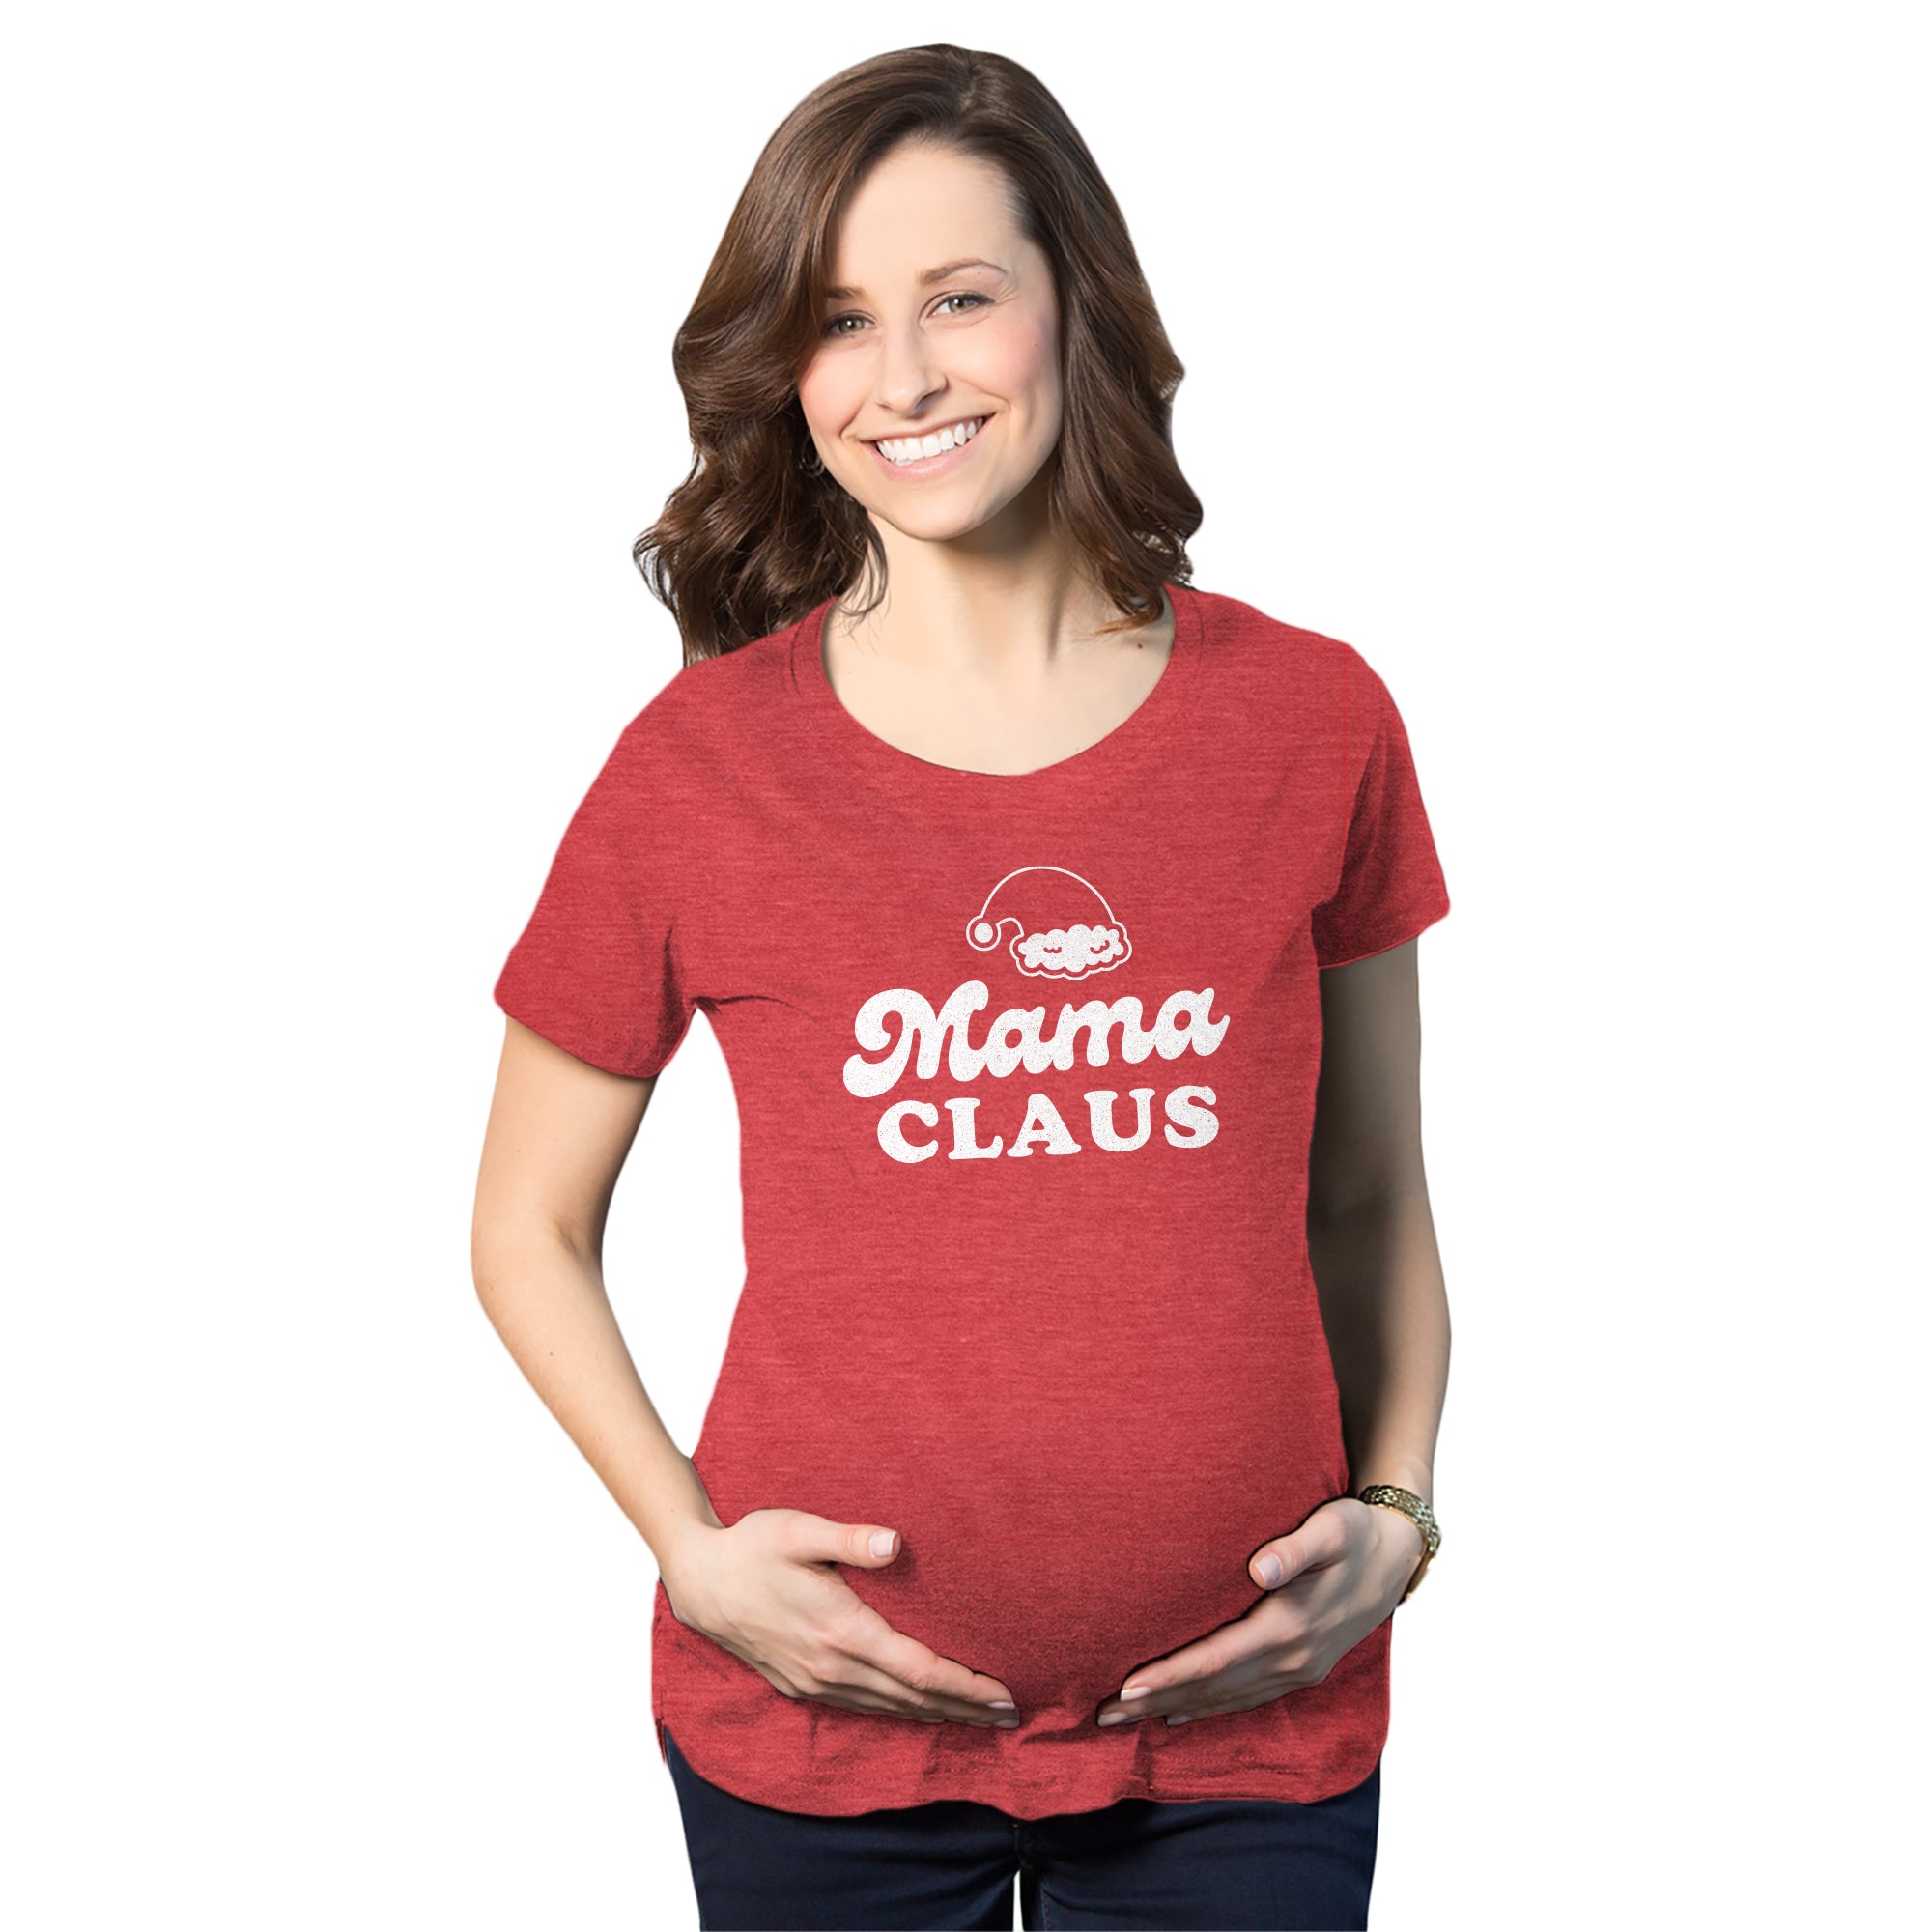 Funny pregnancy we are pregnant but t-shirt